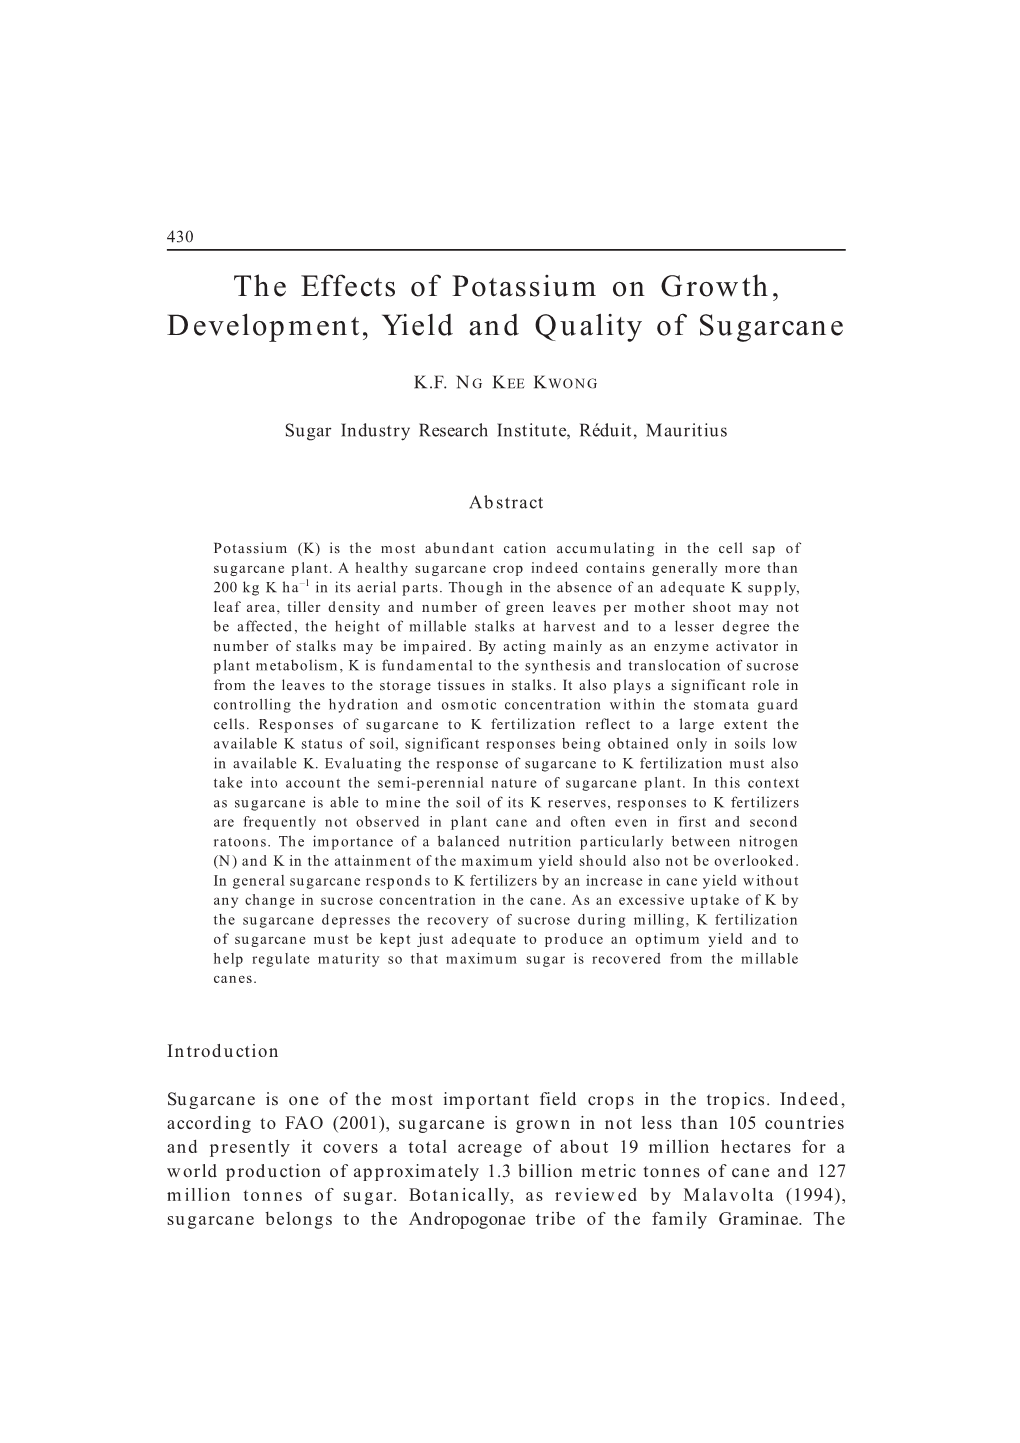 The Effects of Potassium on Growth, Development, Yield and Quality of Sugarcane